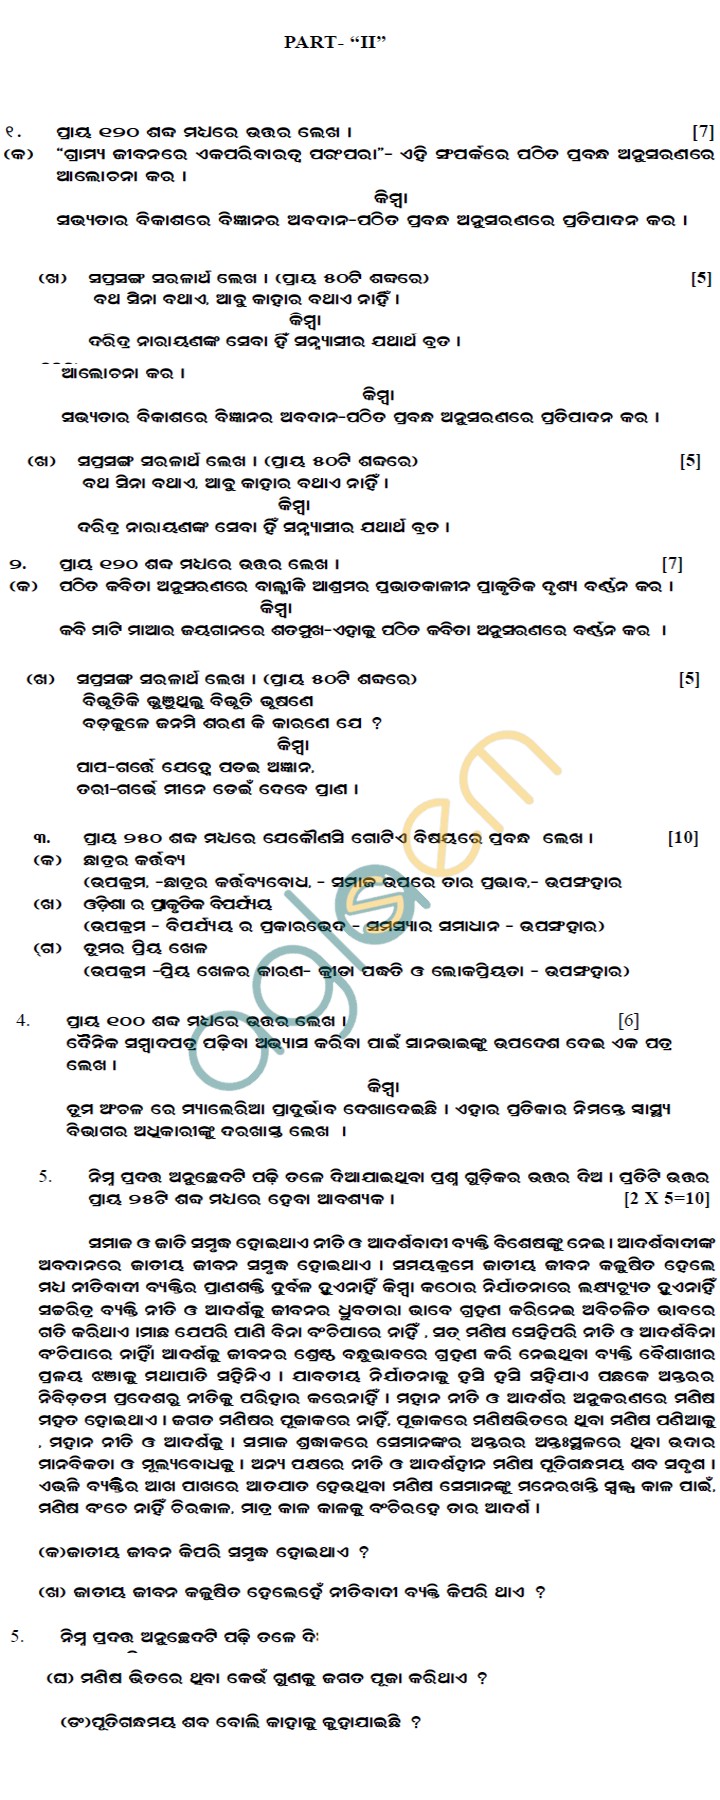 Odisha Board Sample Papers for HSC Exam 2014 - MIL Odia